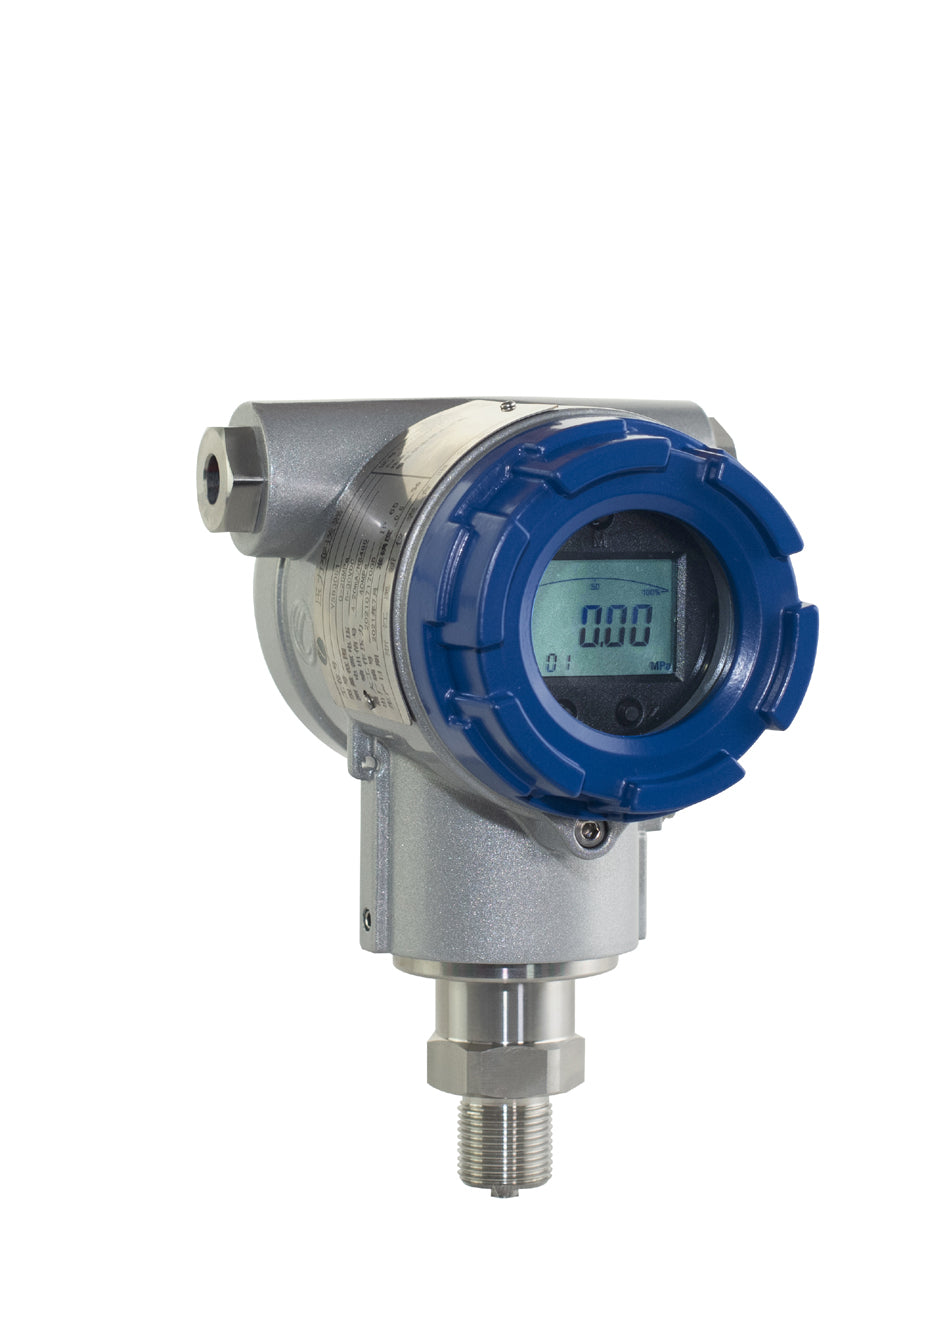 YSB pressure transmitter, your best industrial production tool